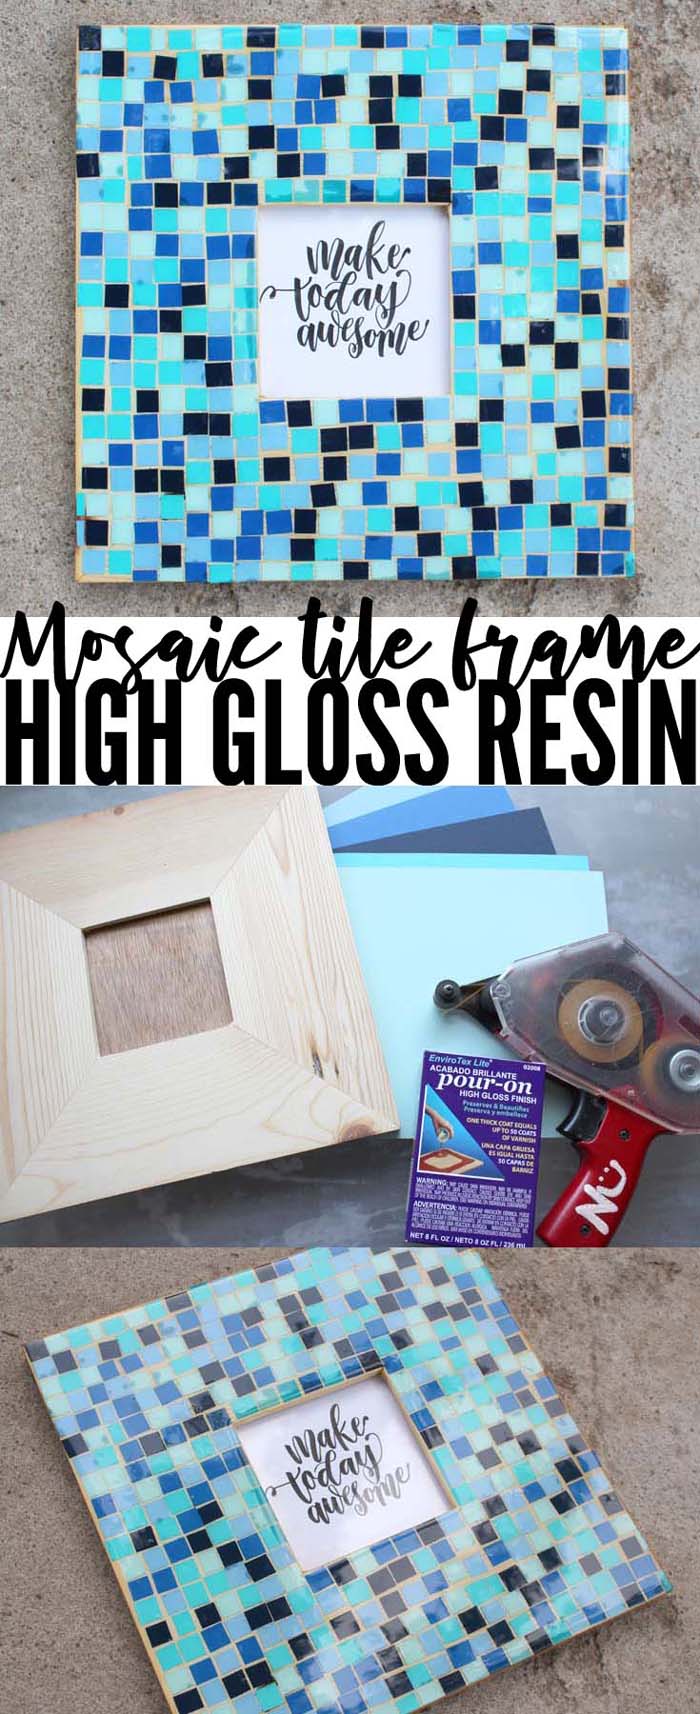 Make a Paper Mosaic frame that looks like tile!  Envirotex Lite High Gloss Resin for the win!!!  Simple DIY for a custom Home Decor piece! via @resincraftsblog